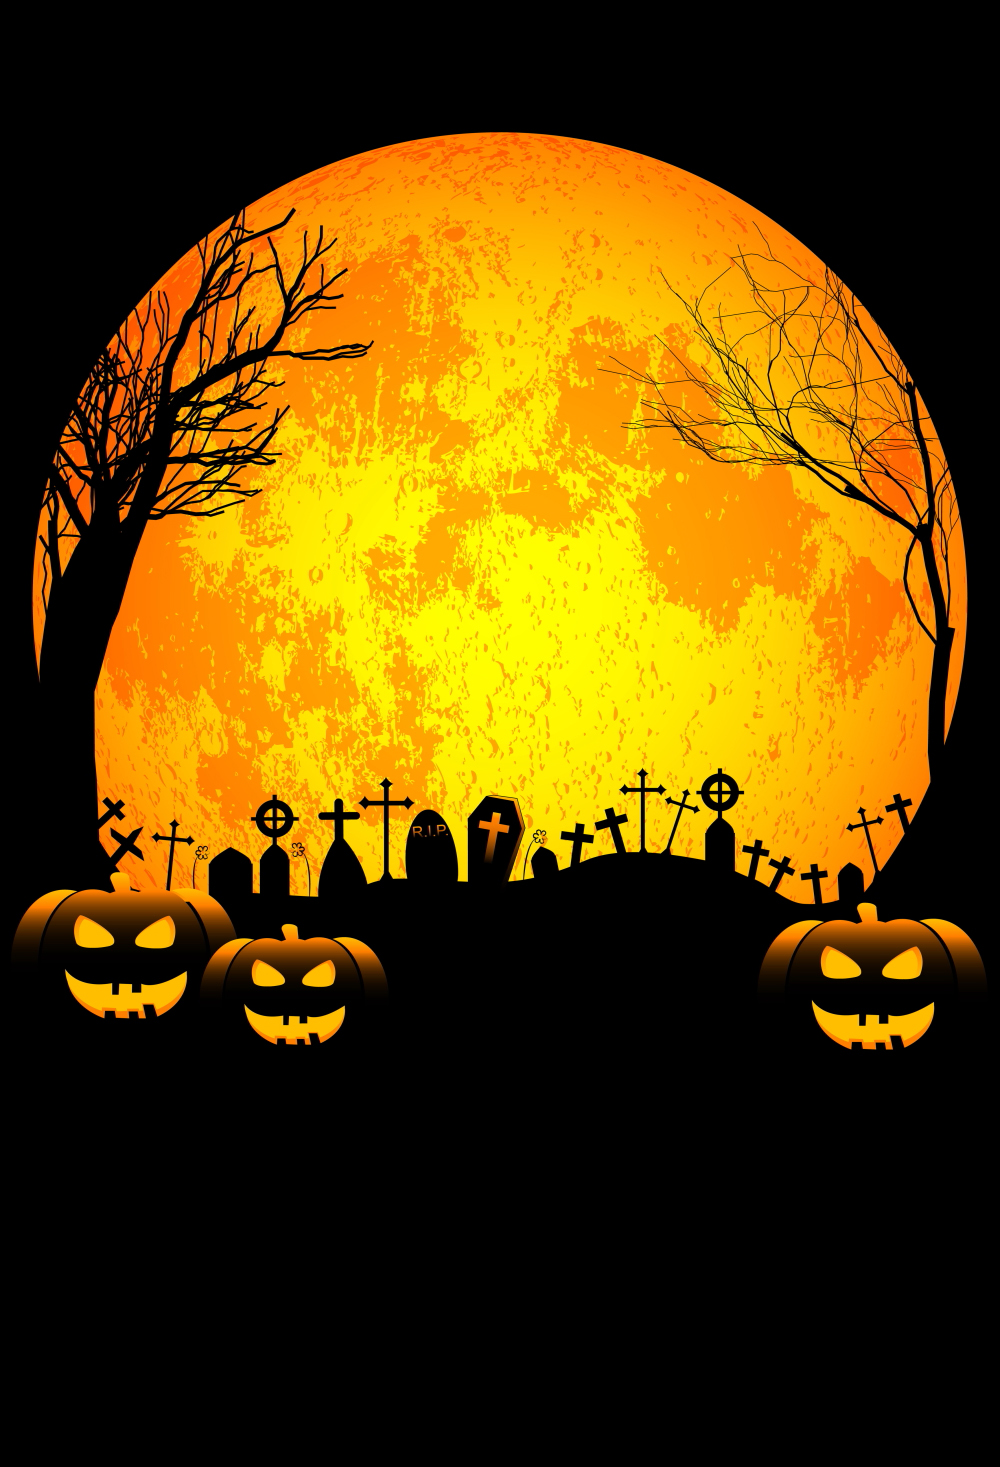 Halloween backgrounds for pictures